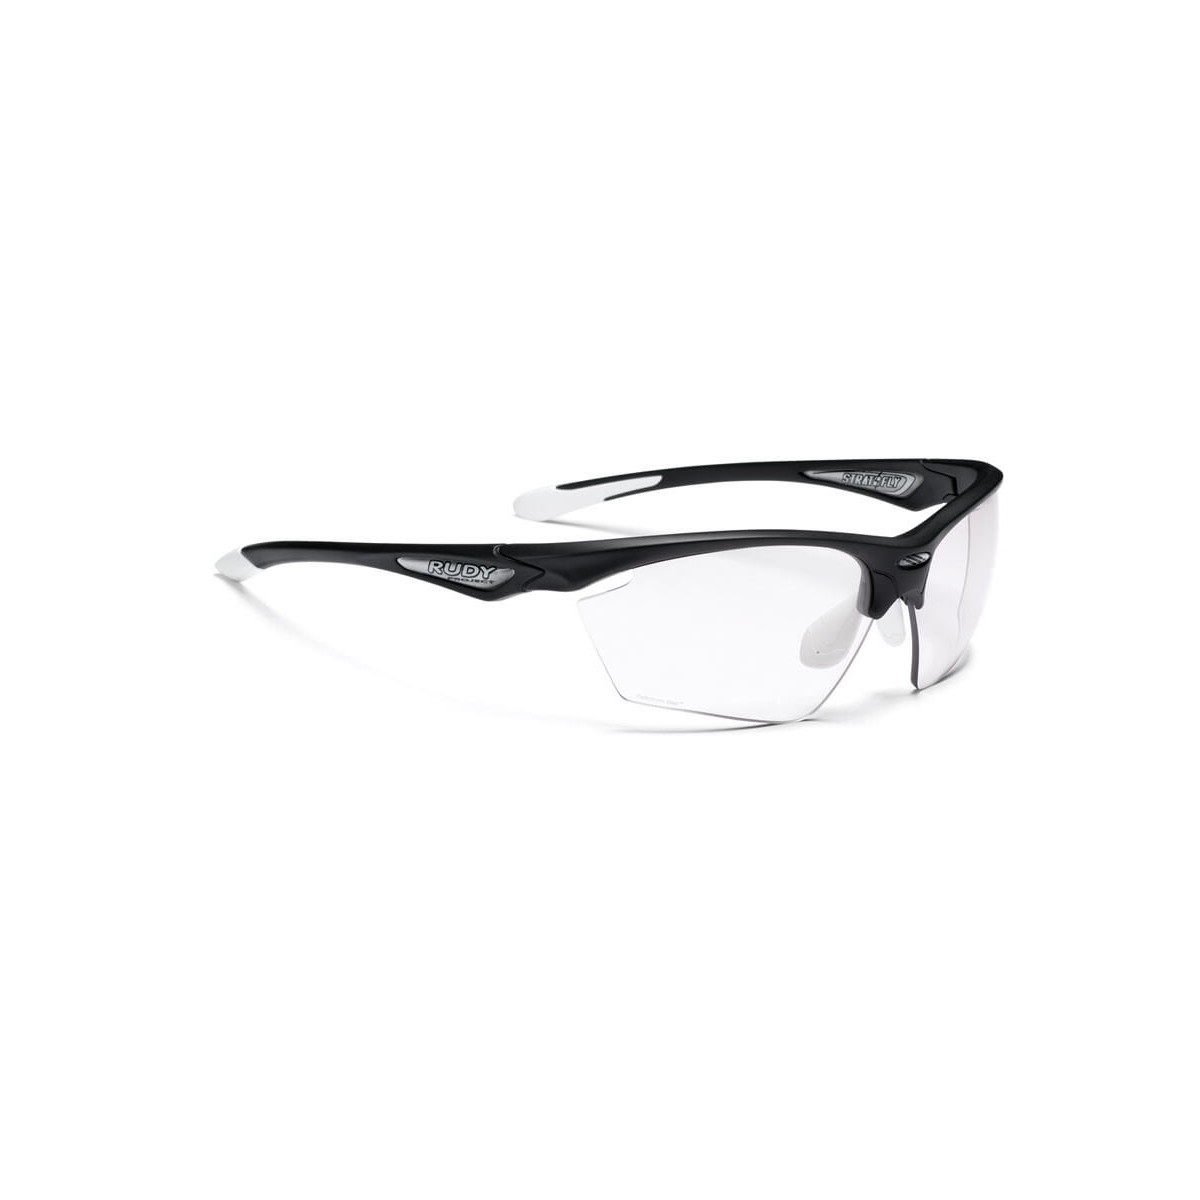 To Fly günstig Kaufen-Brille Stratofly Black Gloss RPO Photoclear Rudy Project. Brille Stratofly Black Gloss RPO Photoclear Rudy Project . 